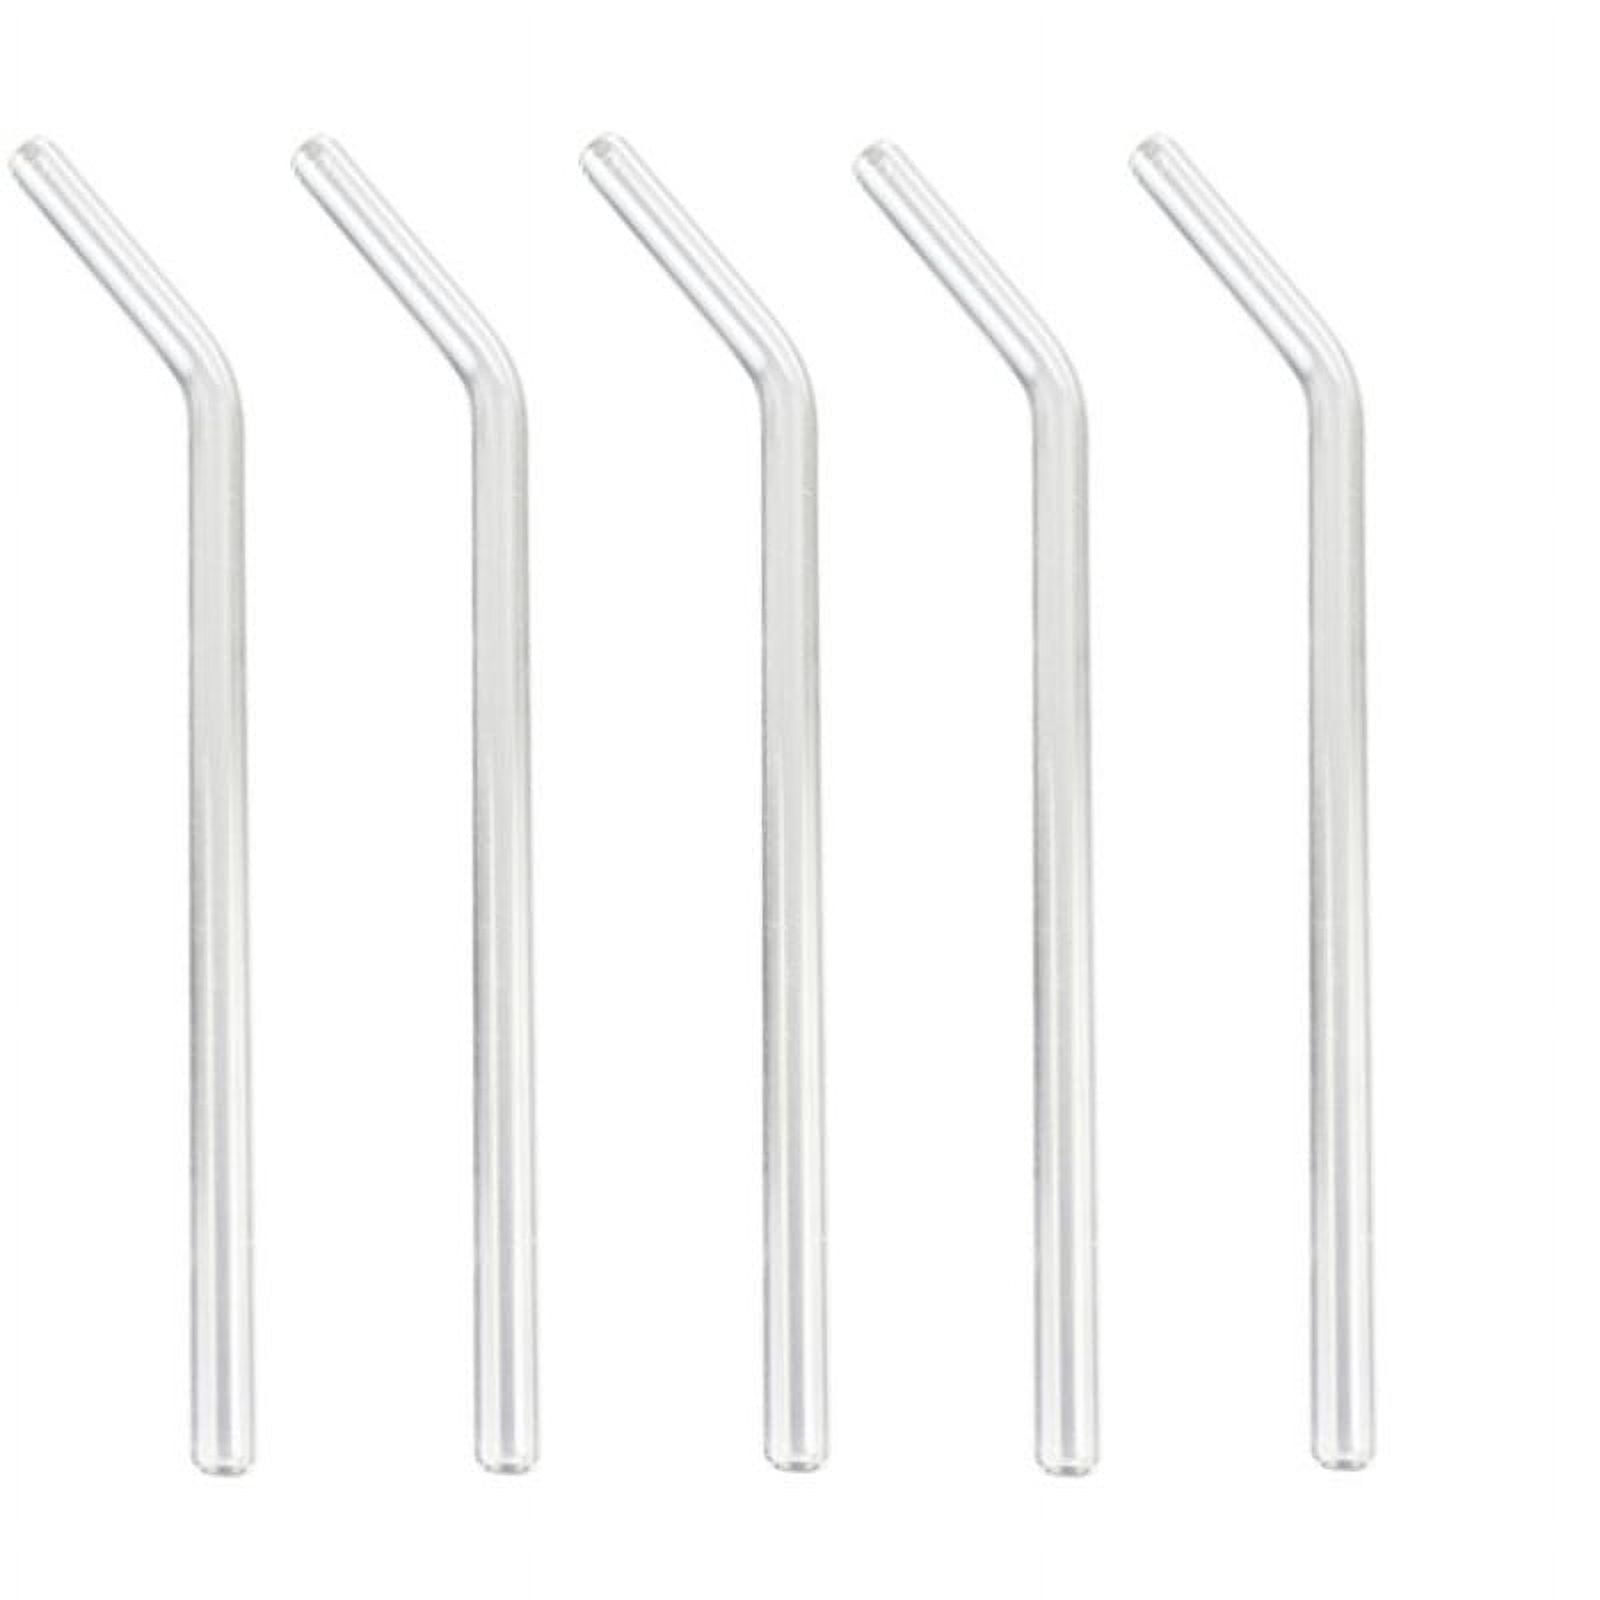 Reusable Glass Straws, 5Pcs 8mm Bent Glass Drinking Straws, Non-Toxic, BPA  Free Glass Straws for Beverages, Shakes, Milk Tea, Juices, Bright Blue